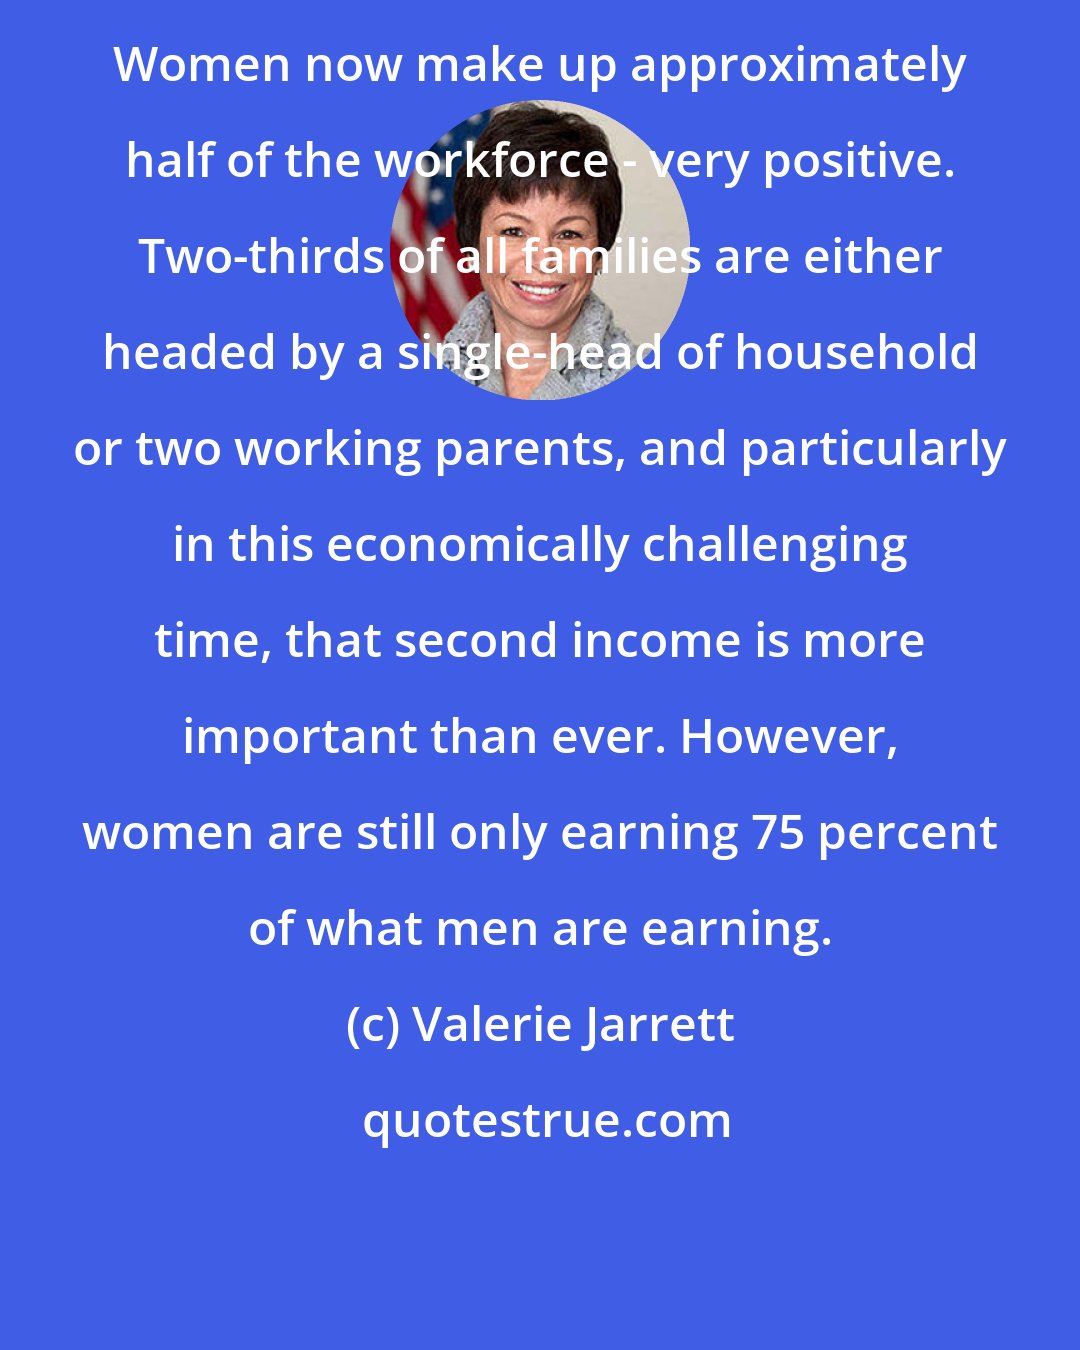 Valerie Jarrett: Women now make up approximately half of the workforce - very positive. Two-thirds of all families are either headed by a single-head of household or two working parents, and particularly in this economically challenging time, that second income is more important than ever. However, women are still only earning 75 percent of what men are earning.